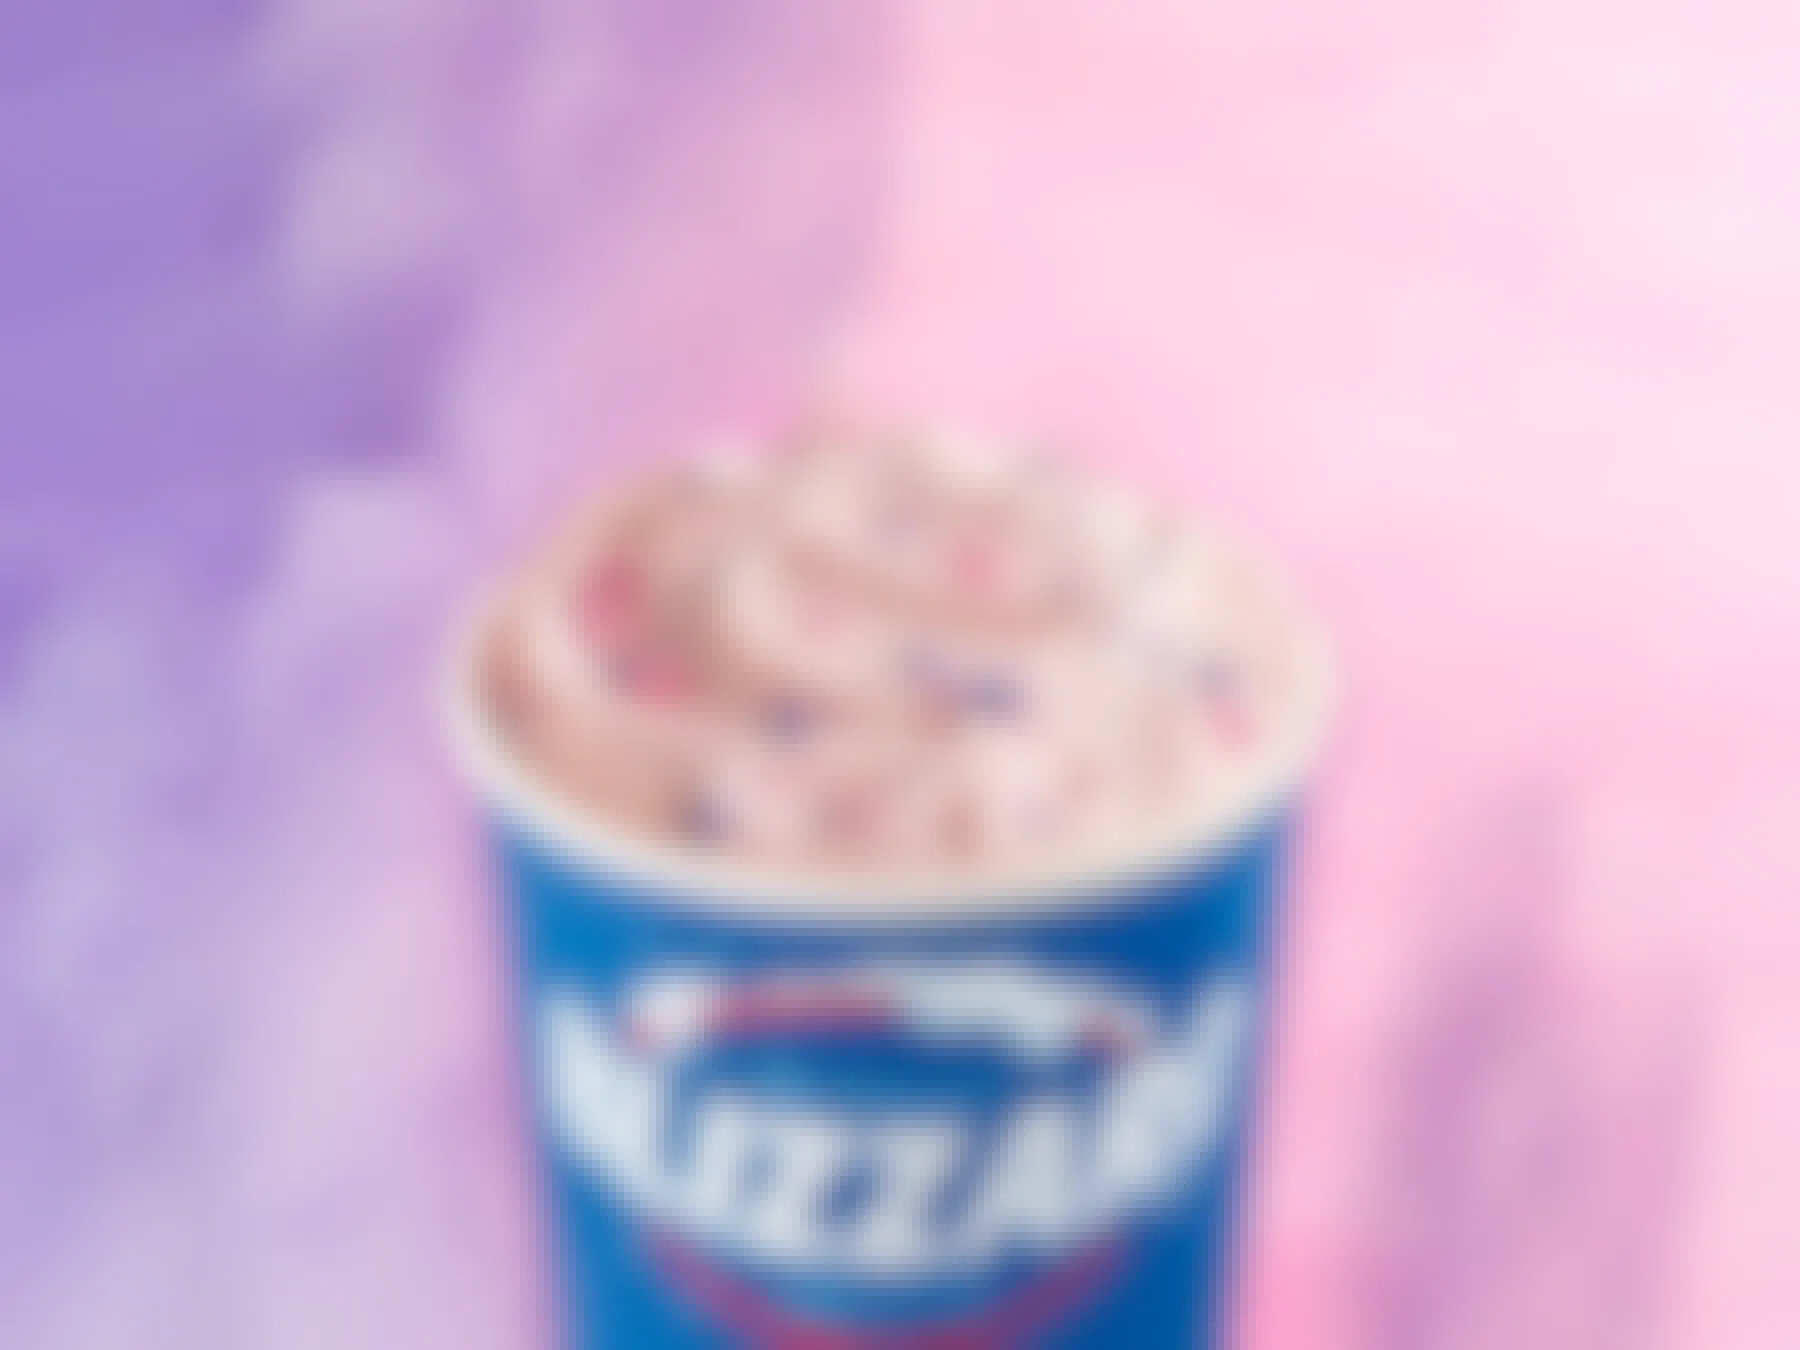 The Dairy Queen Cotton Candy Blizzard promo image